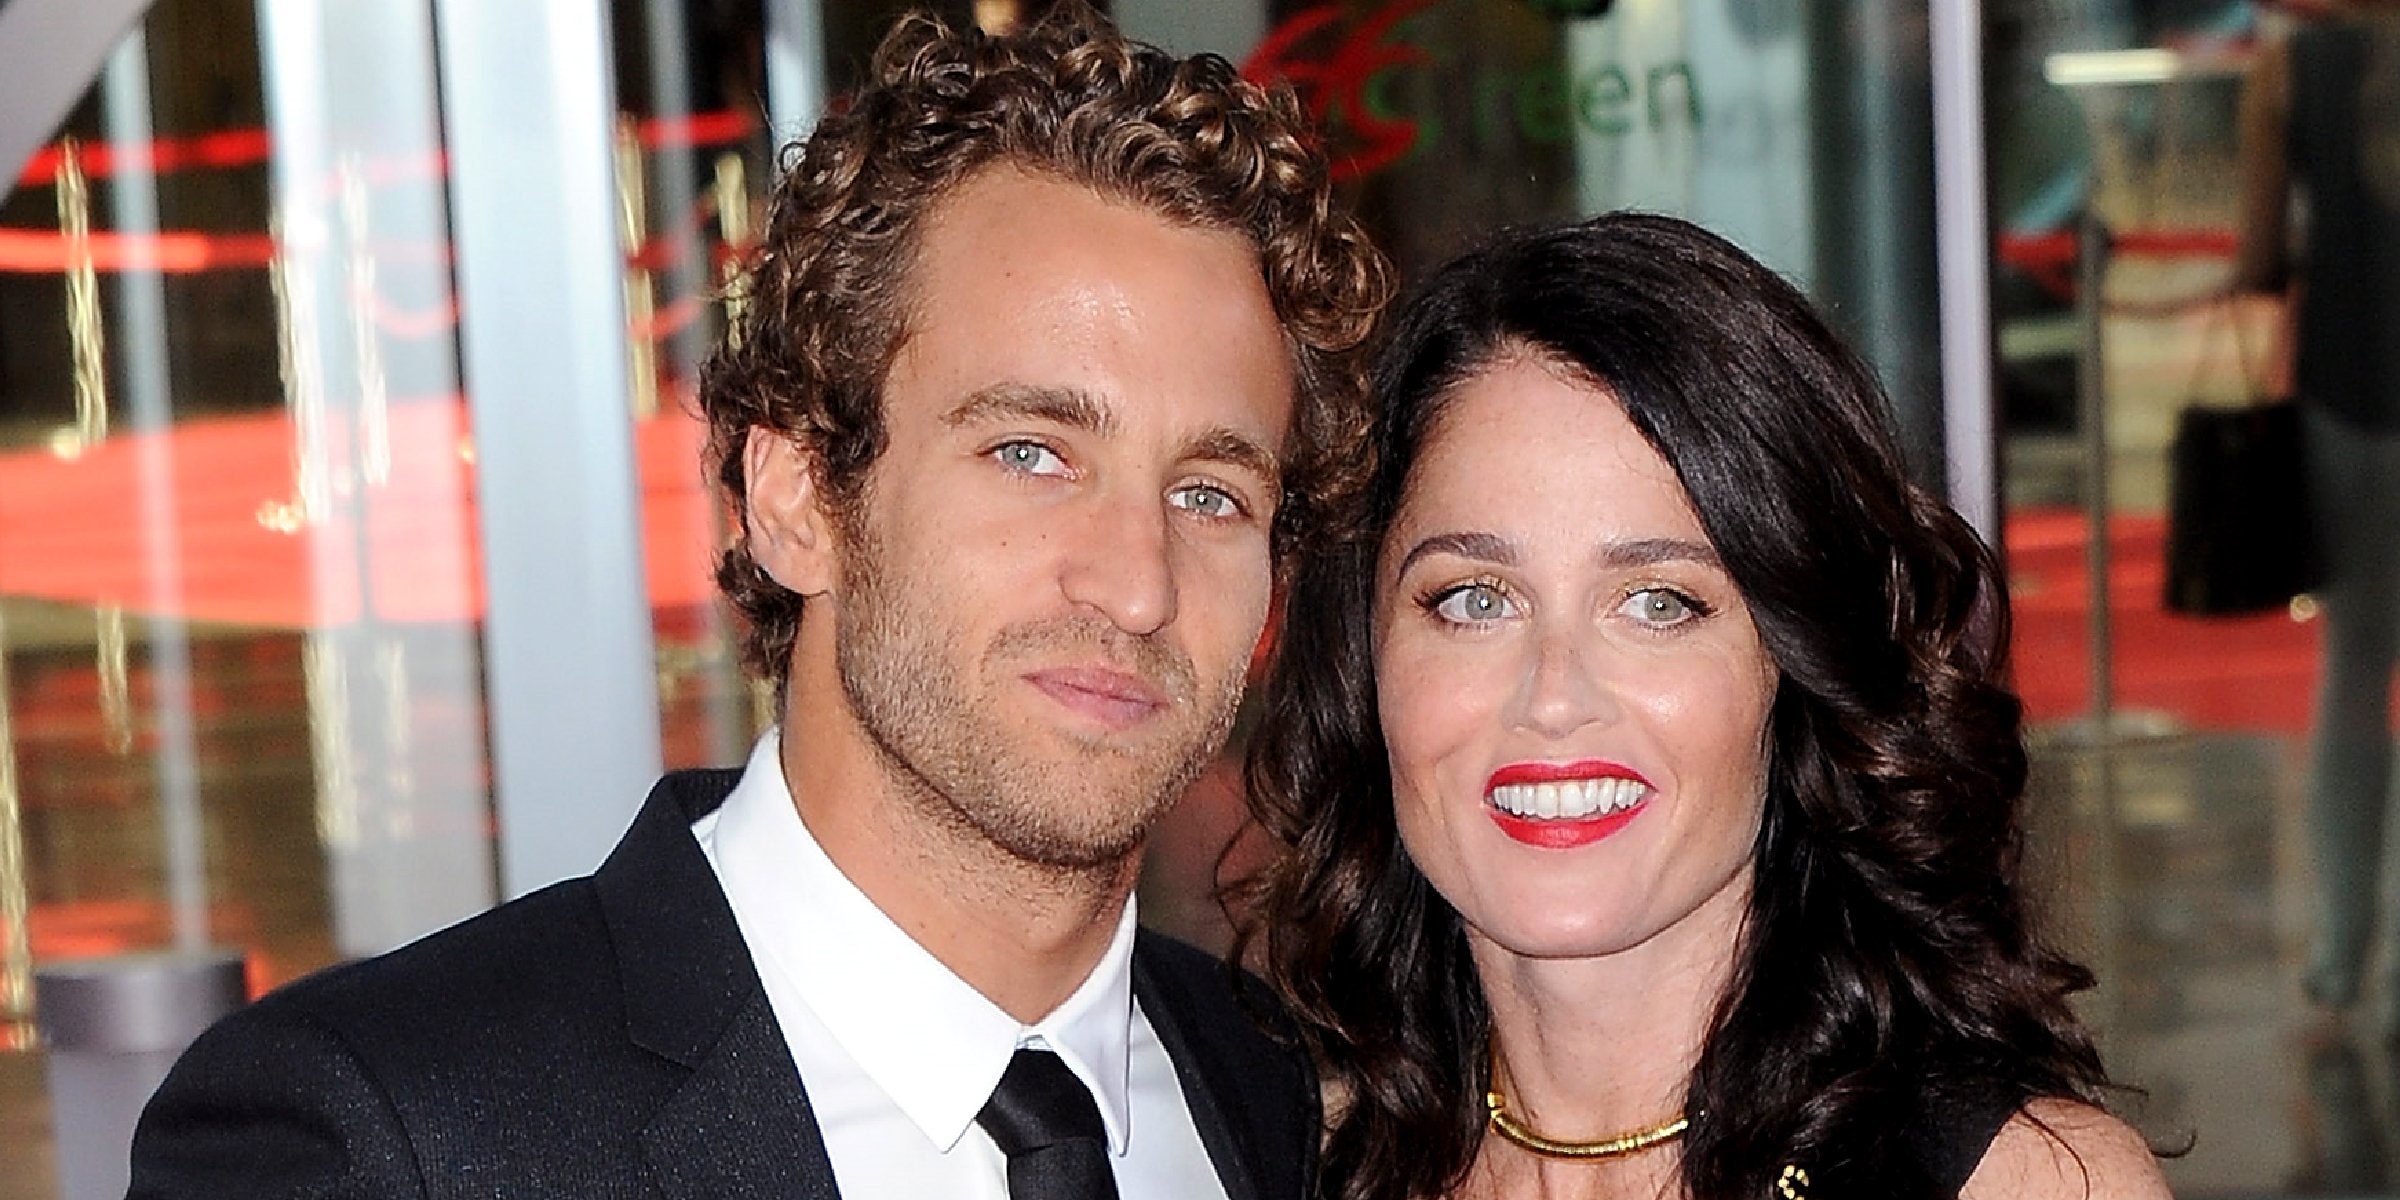 Nicky Marmet and Robin Tunney. | Source: Getty Images